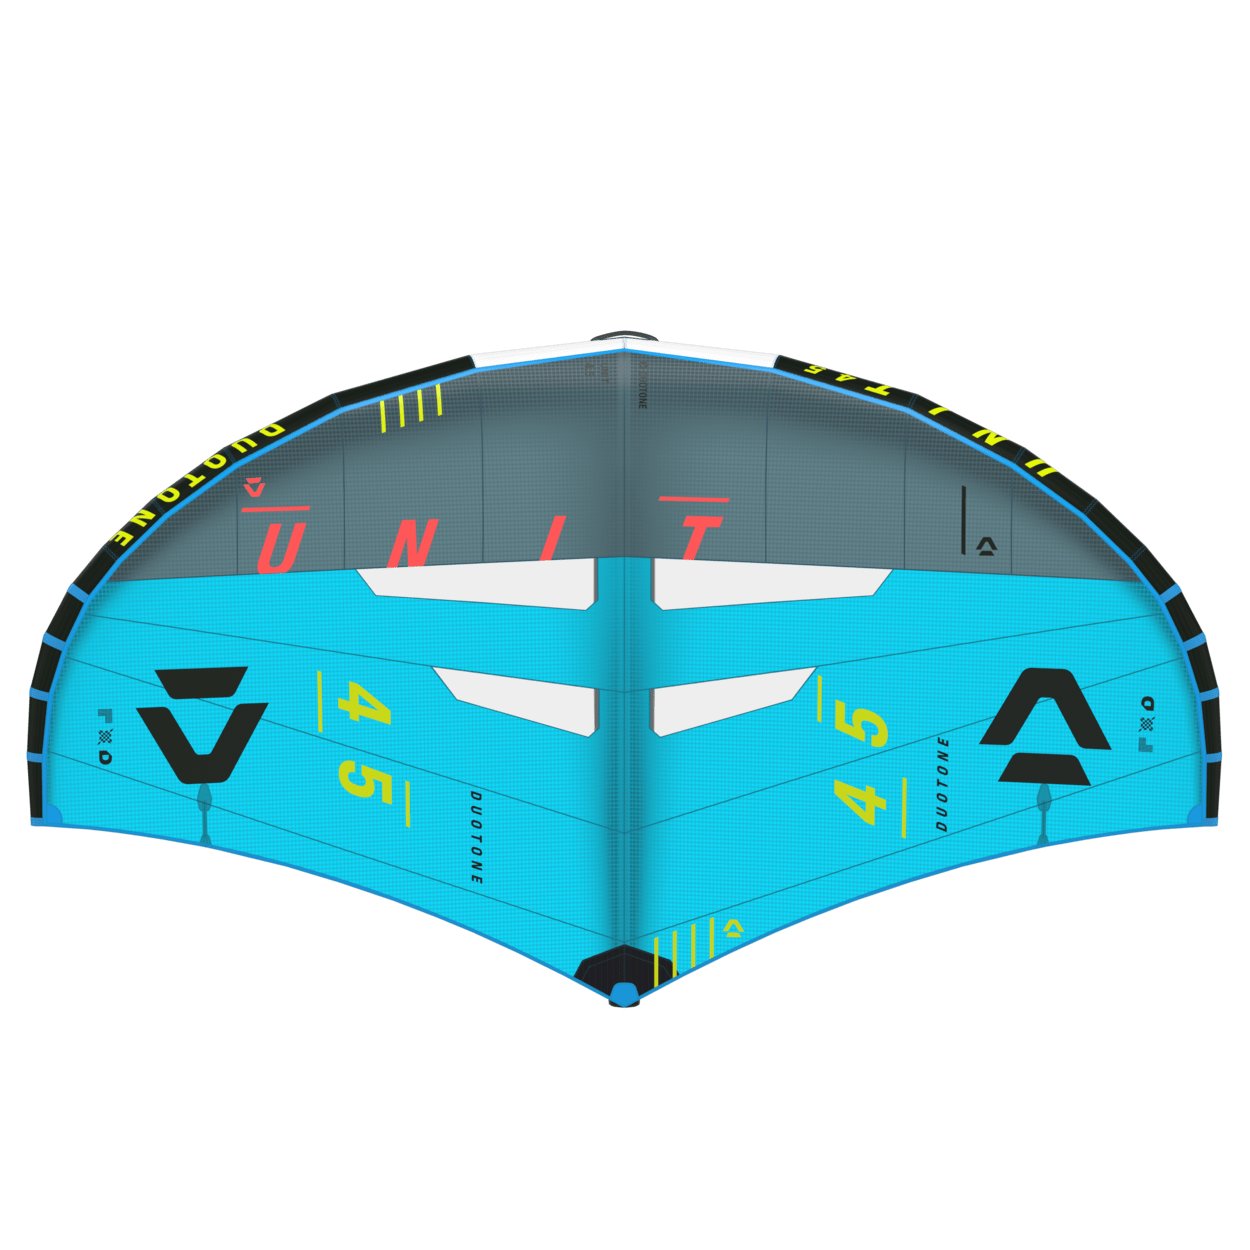 Duotone Foil Wing Unit 2024 - Worthing Watersports - 9010583187907 - Foilwing - Duotone X